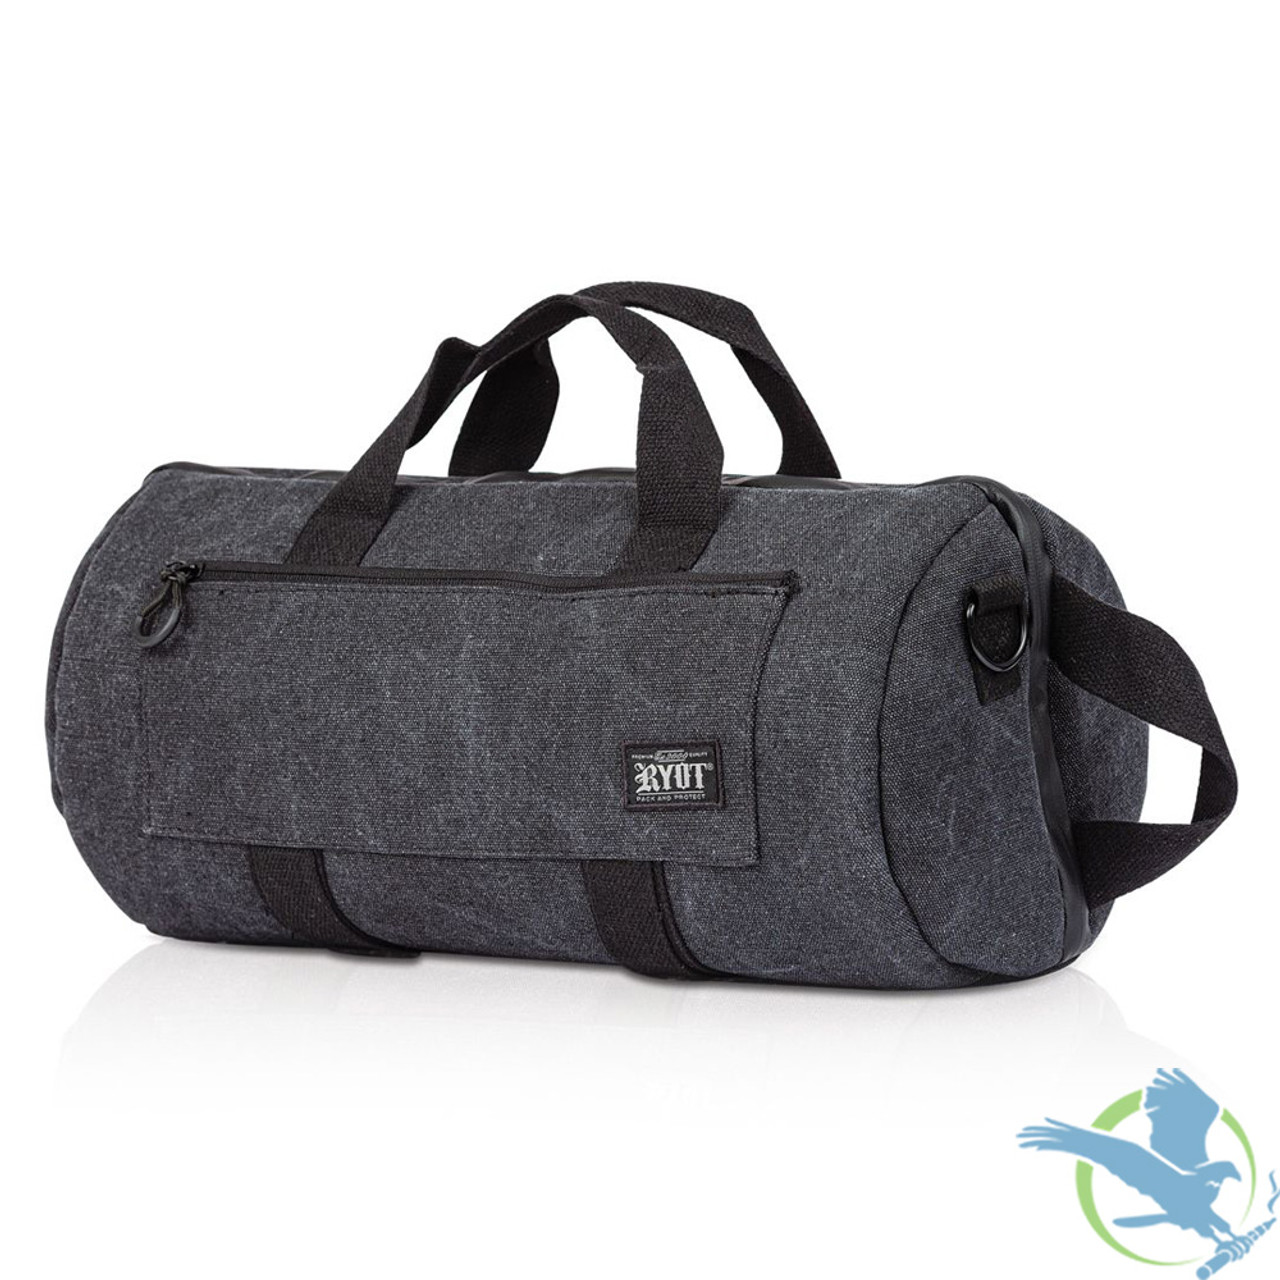 Ryot Pro-Duffle Bag | Containers | Midwest Distribution